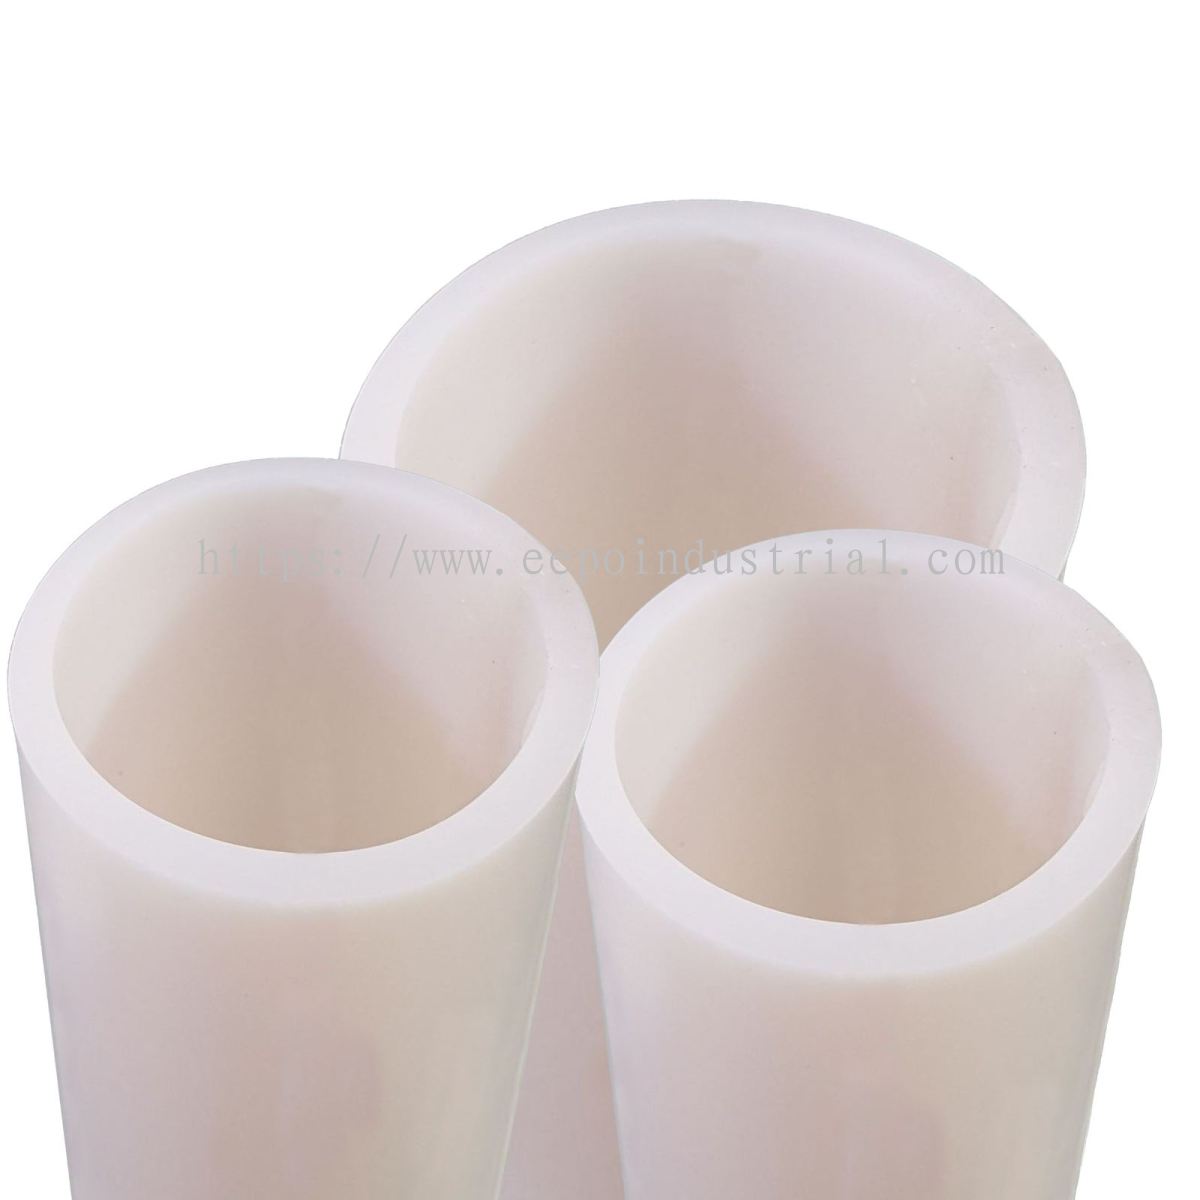 Silicone Rubber Sleeves - The Rubber Company